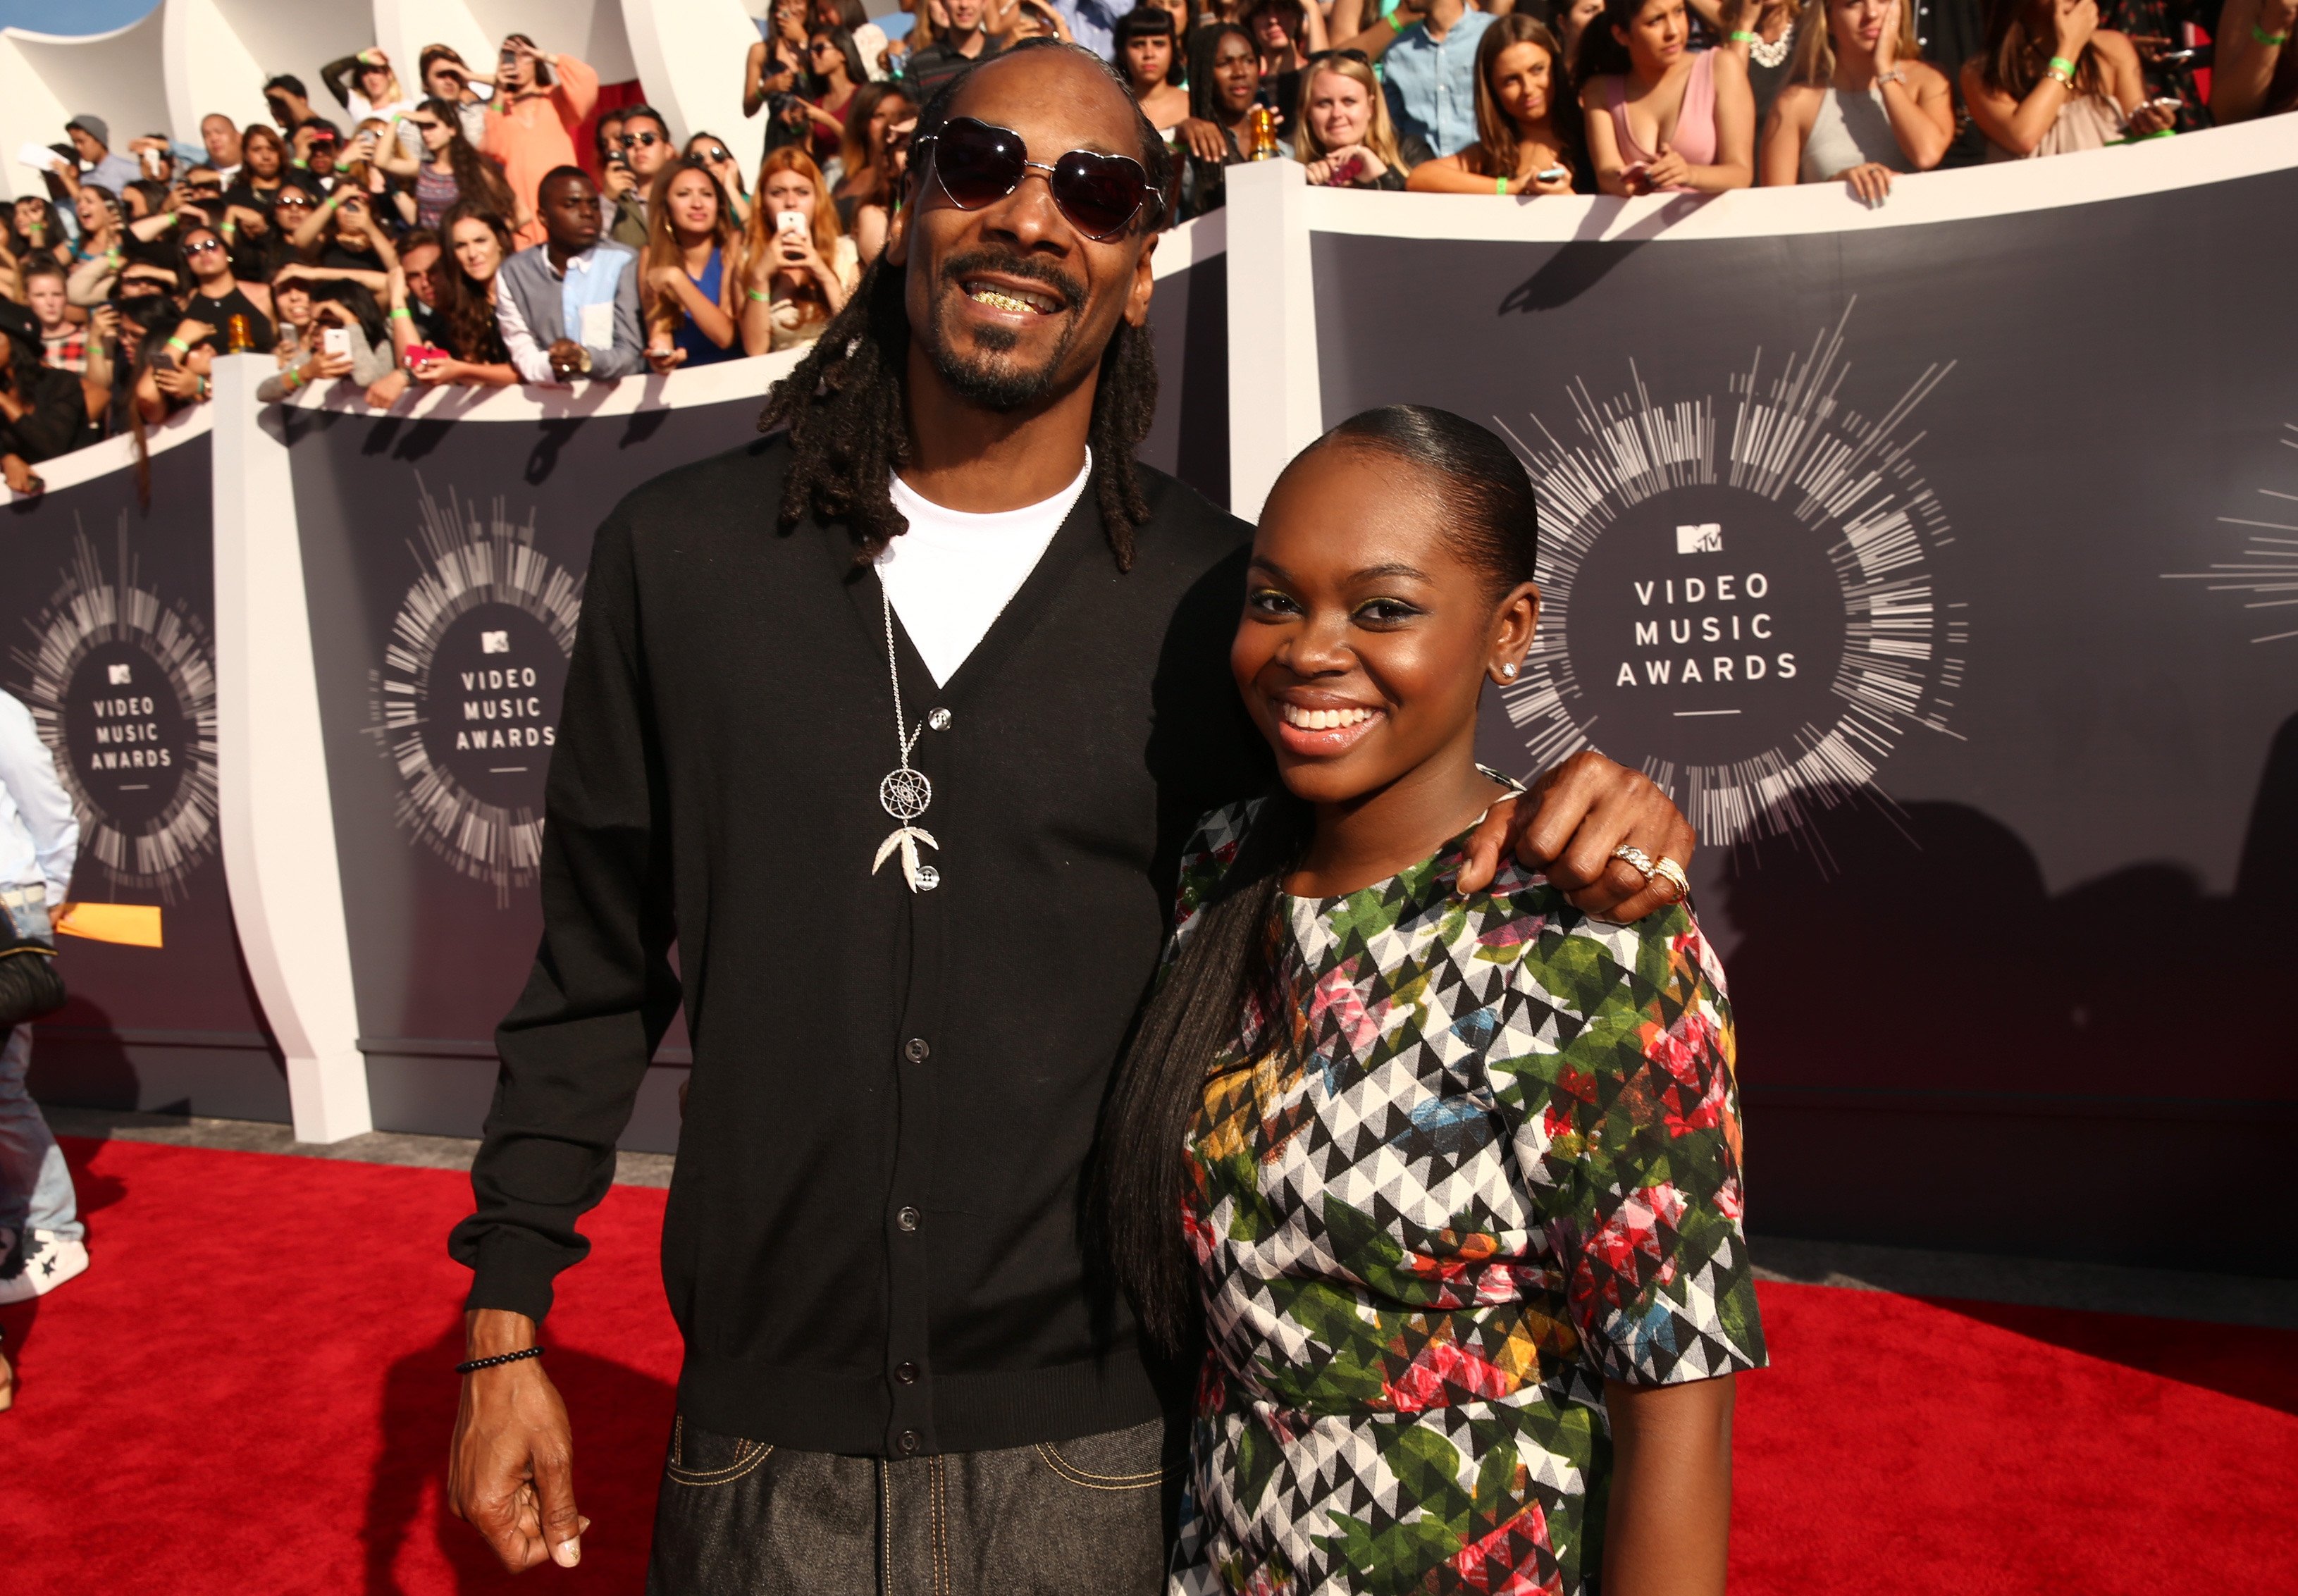 Snoop Dogg and Cori Broadus attend the 2014 MTV Video Music Awards at The Forum on August 24, 2014 in Inglewood, California. | Photo: GettyImages